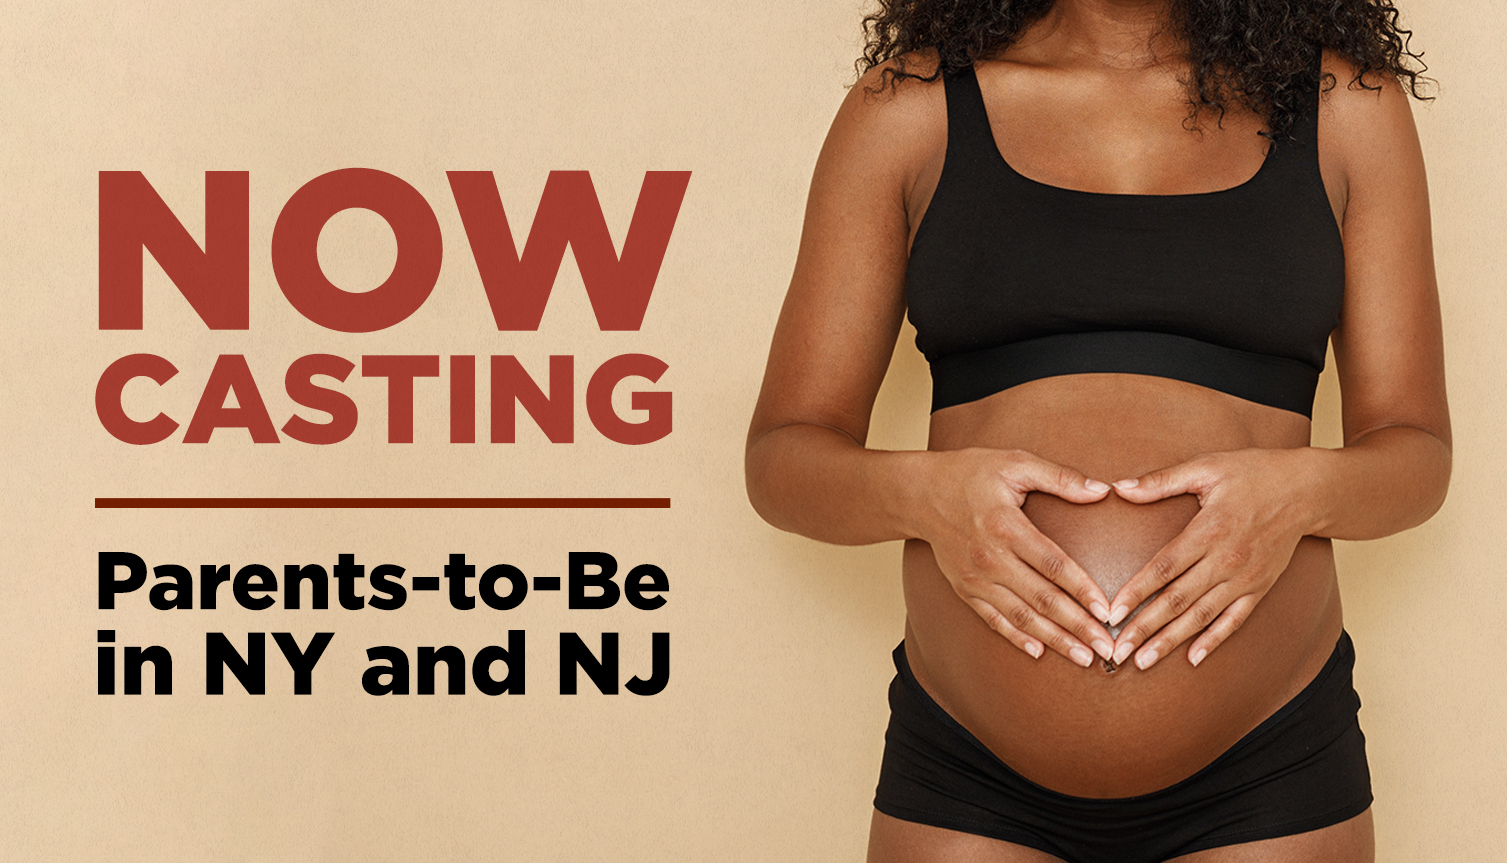 Now Seeking Parents-To-Be in NY & NJ to Receive the Services of an Acclaimed Doula on a New TV Series